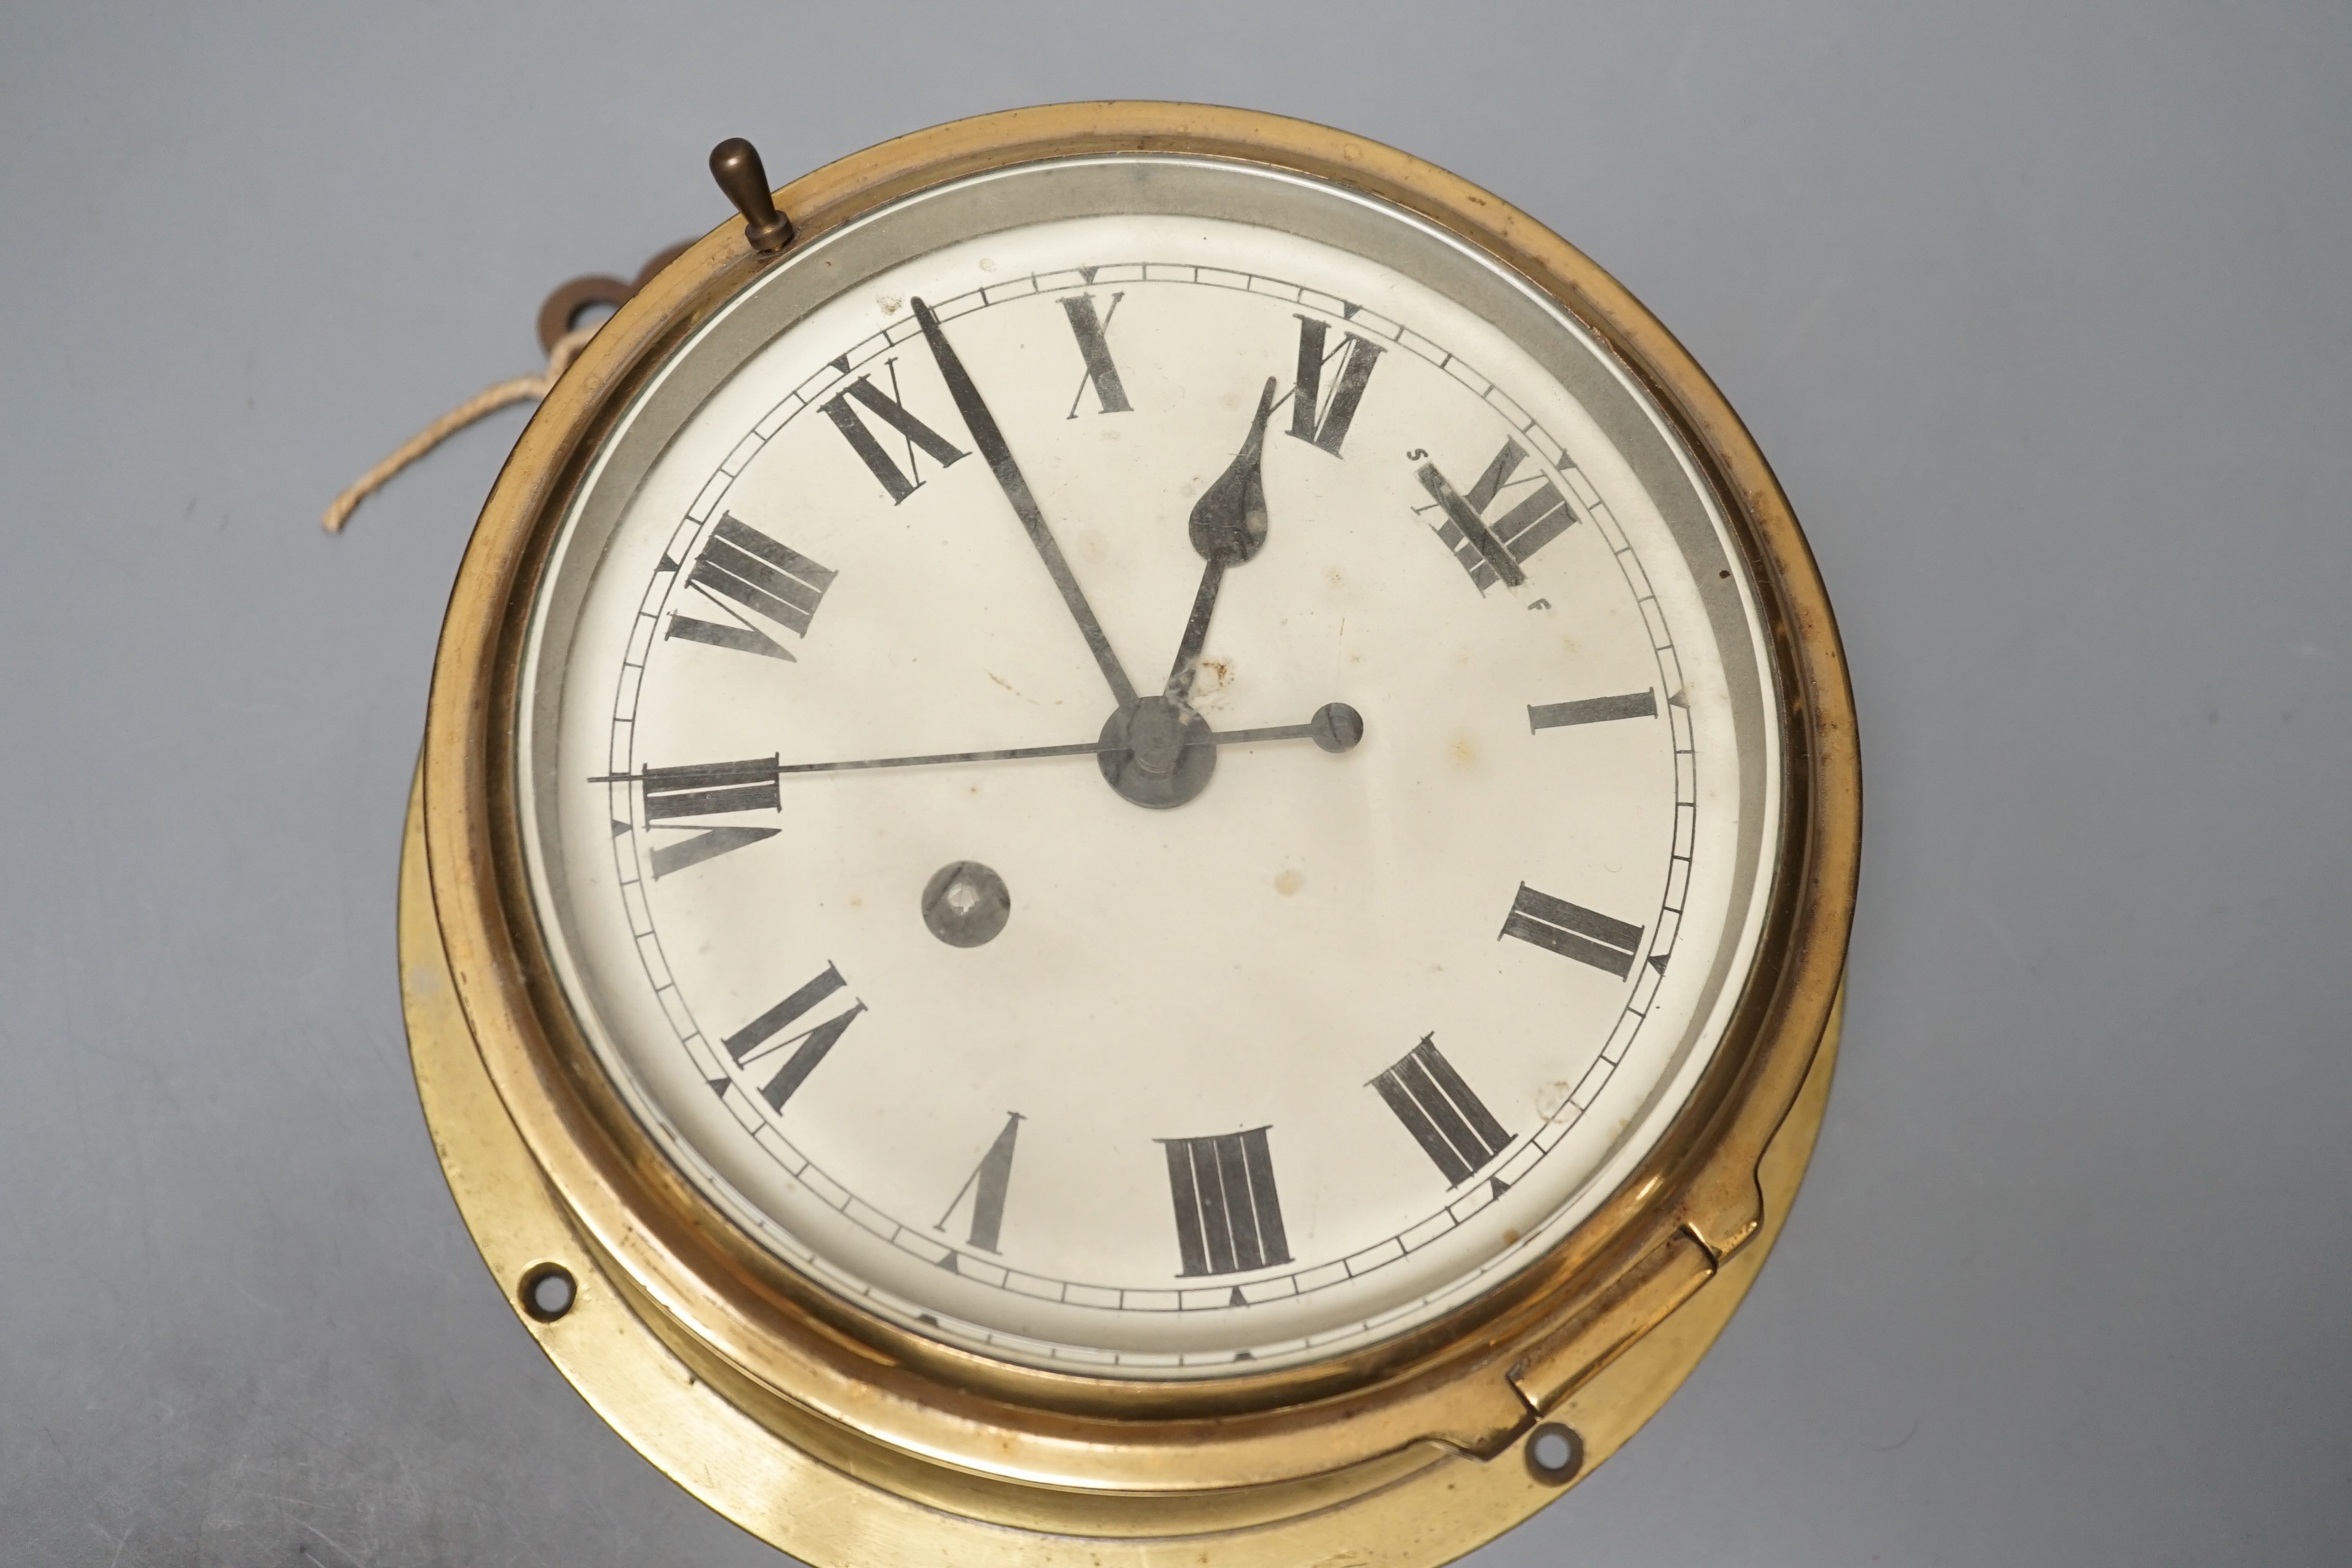 An early 20th century brass ships bulkhead timepiece with key